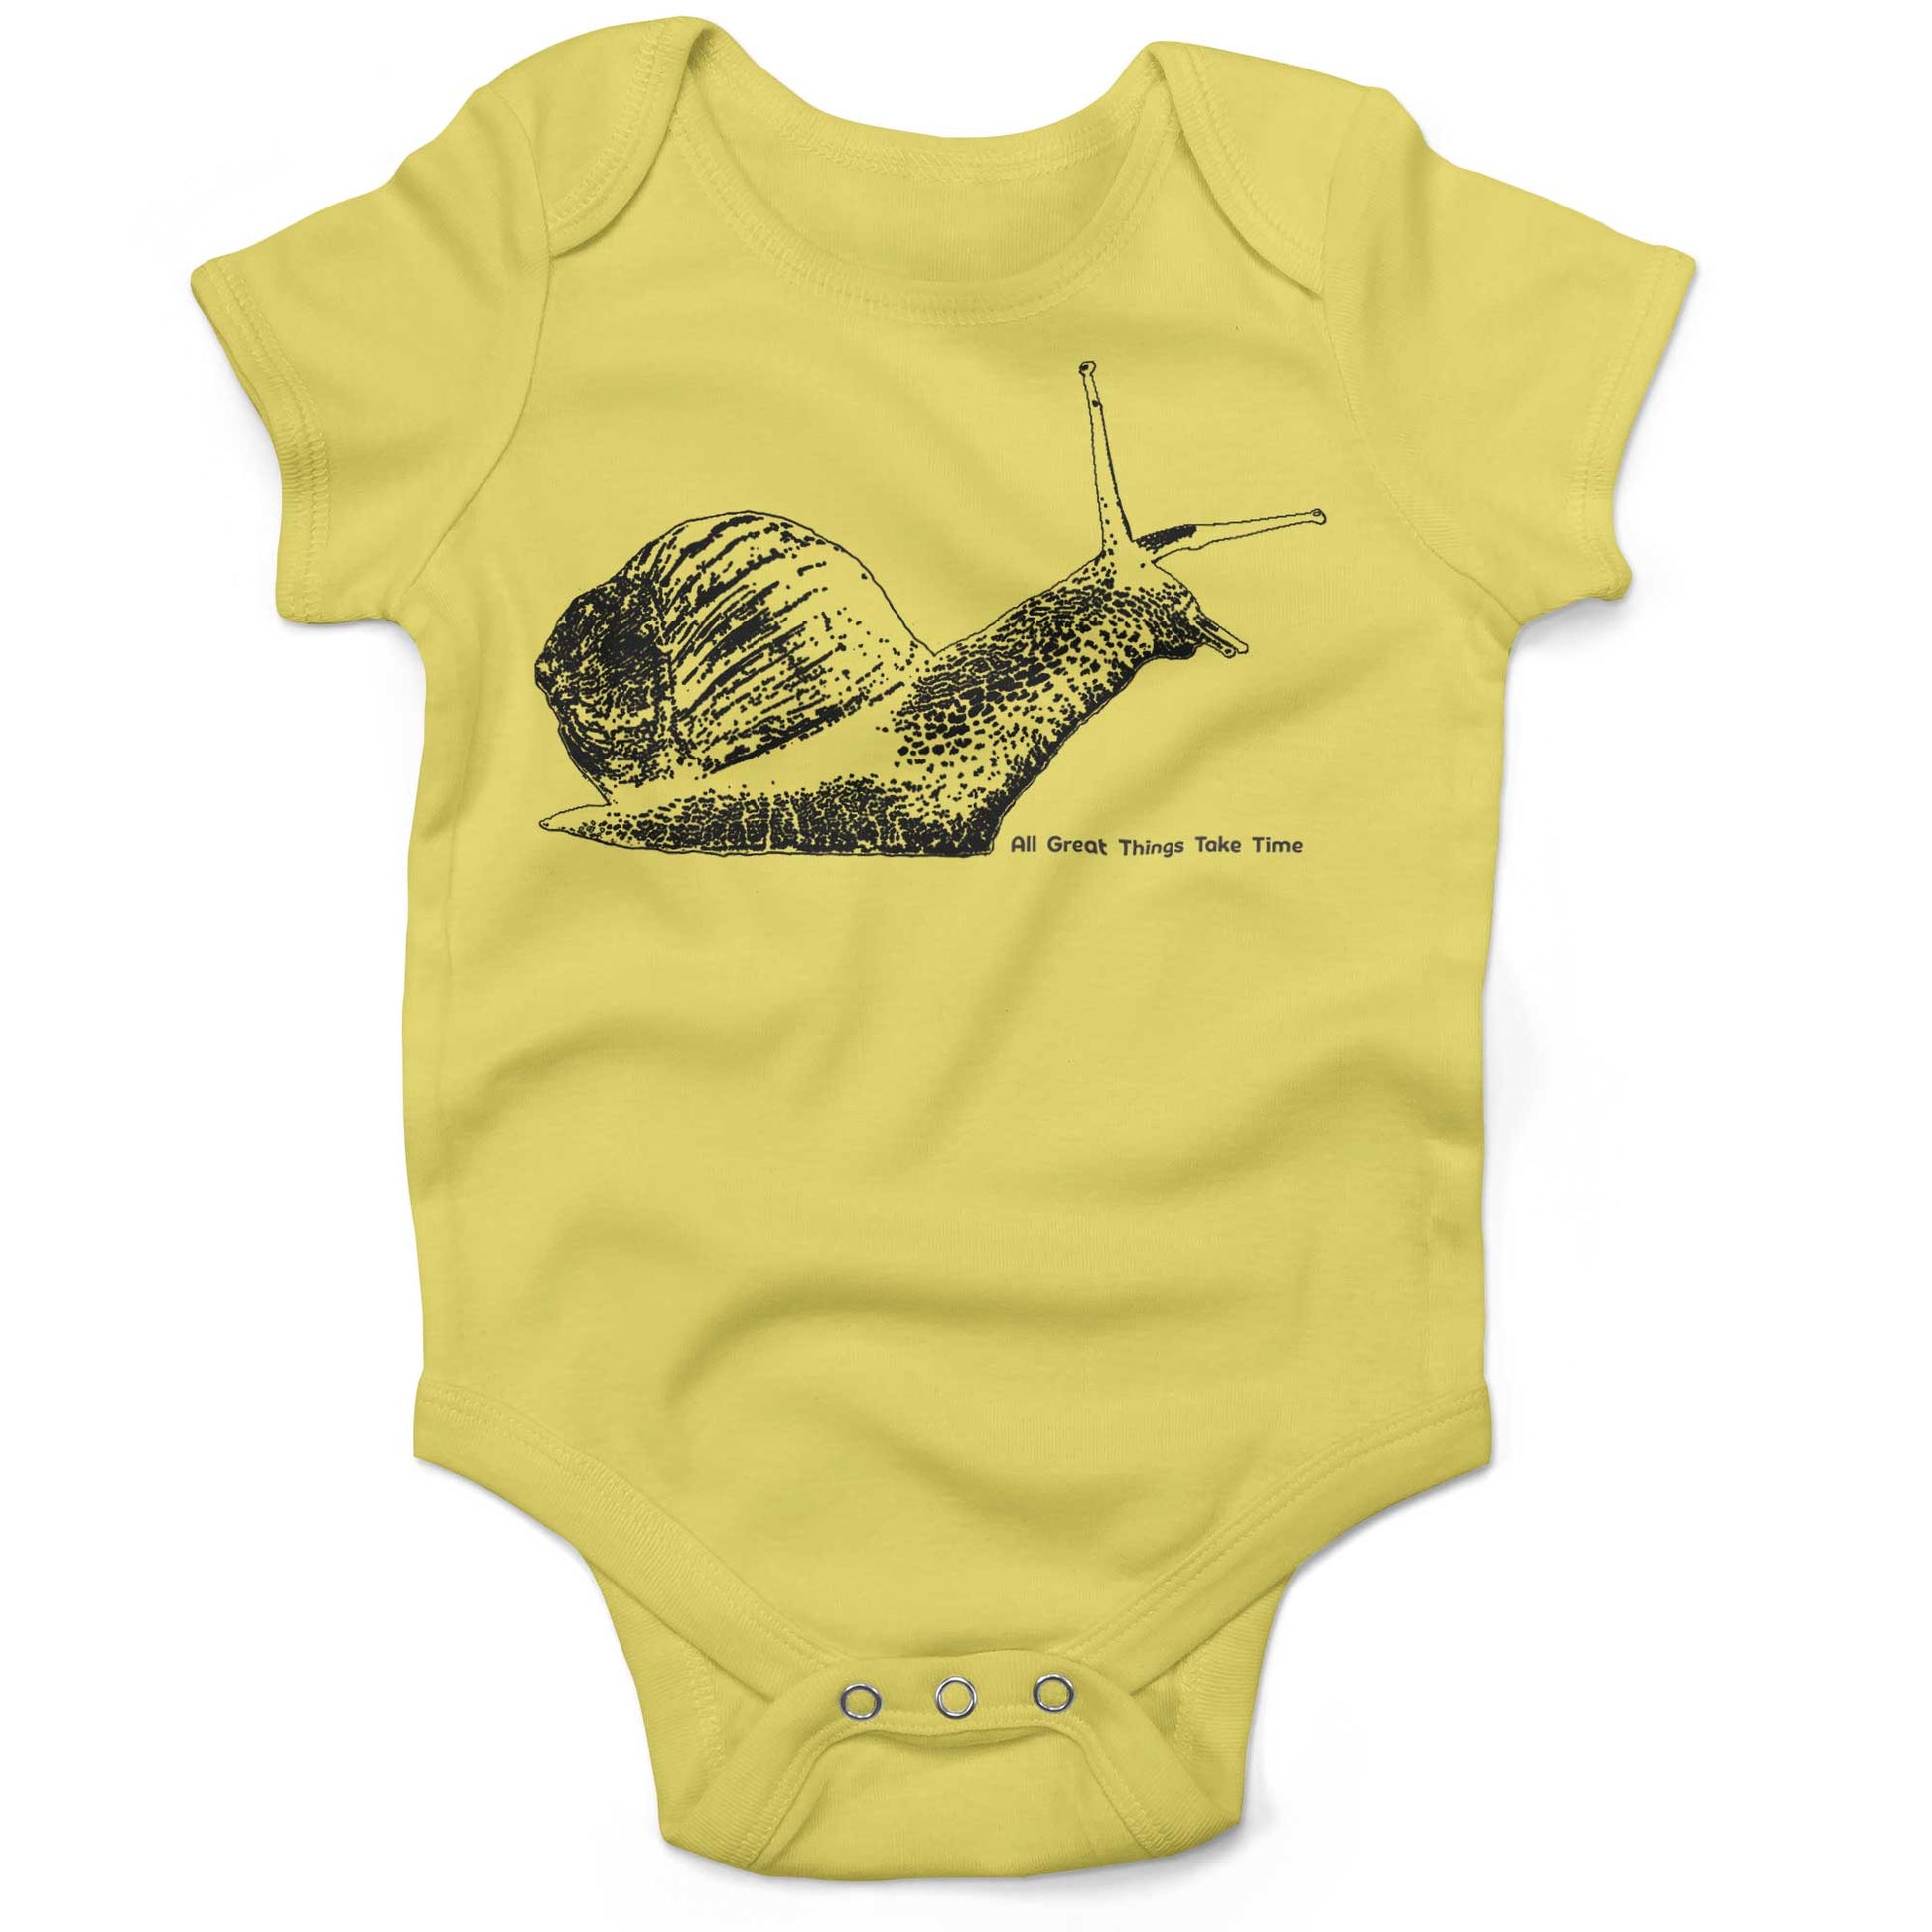 All Great Things Take Time Baby One Piece-Yellow-3-6 months